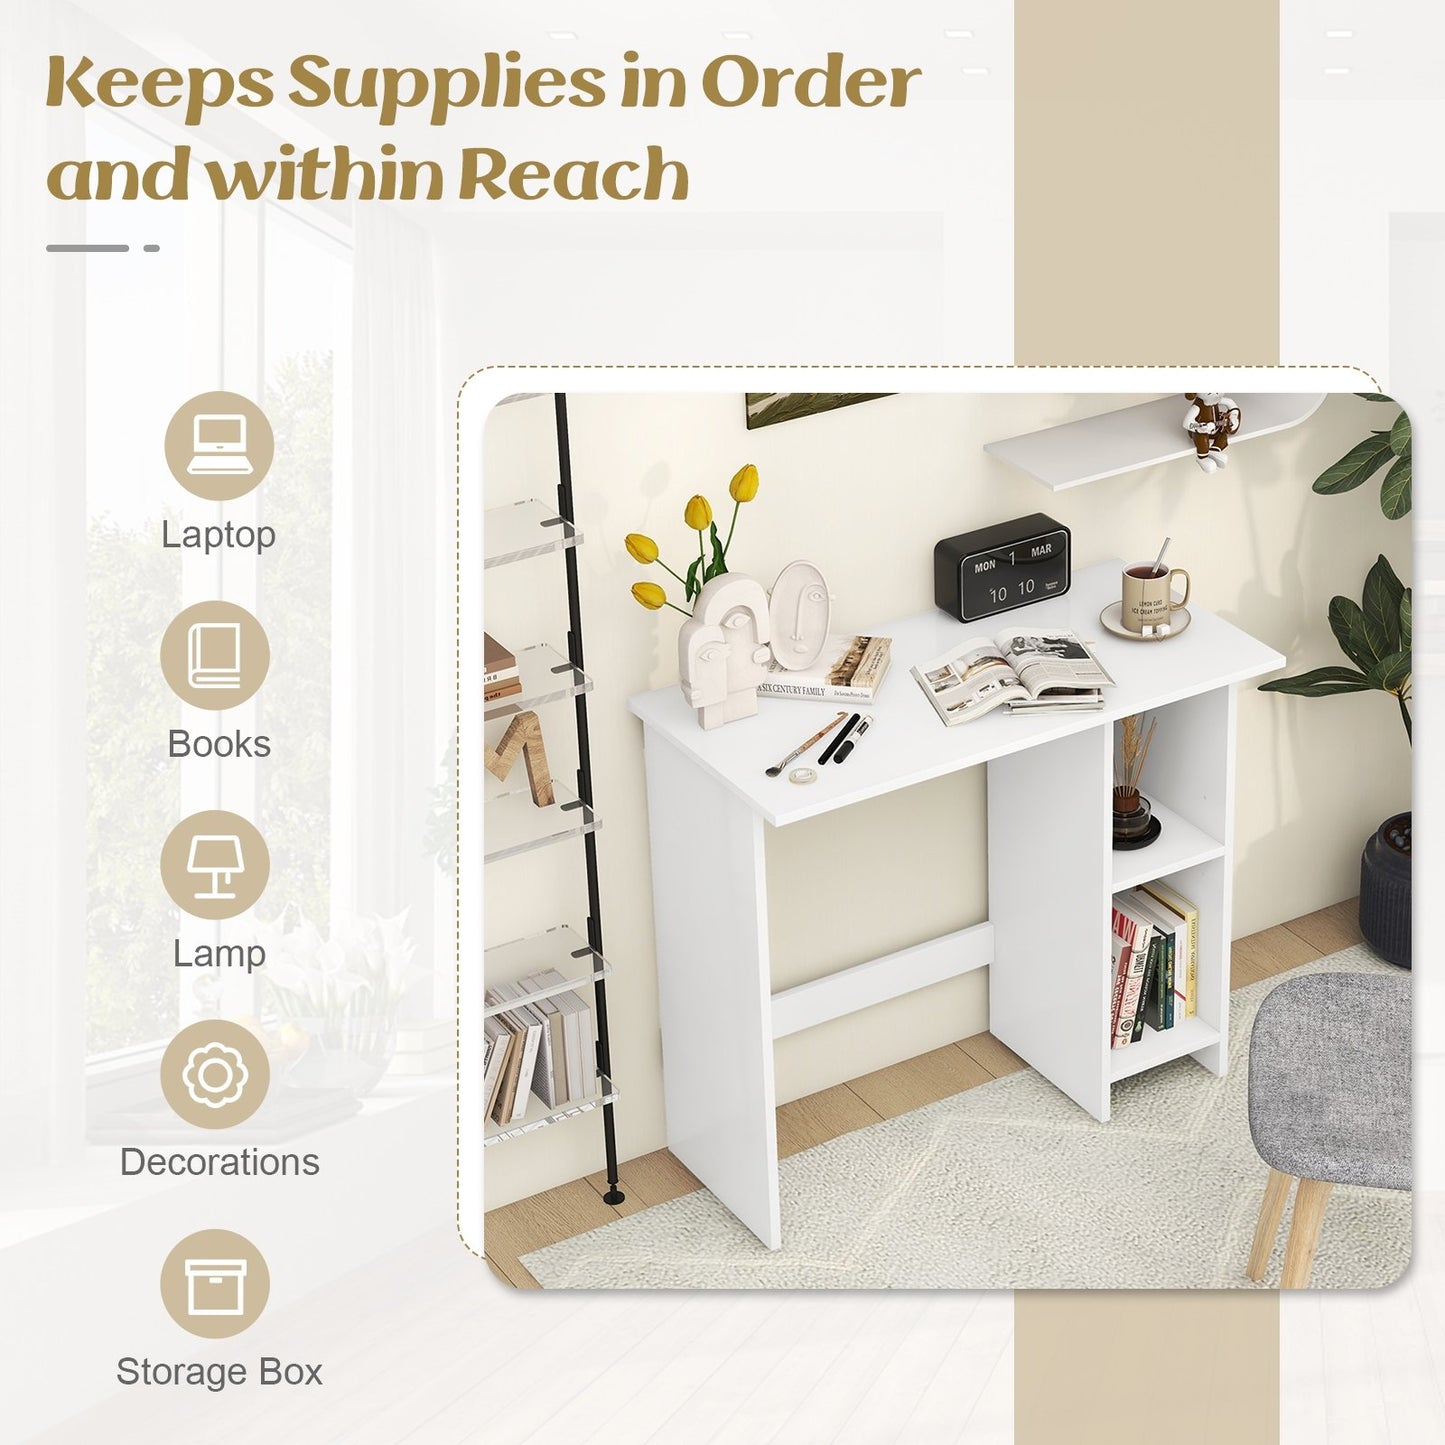 Small Computer Desk with Storage and Adjustable Shelf, White